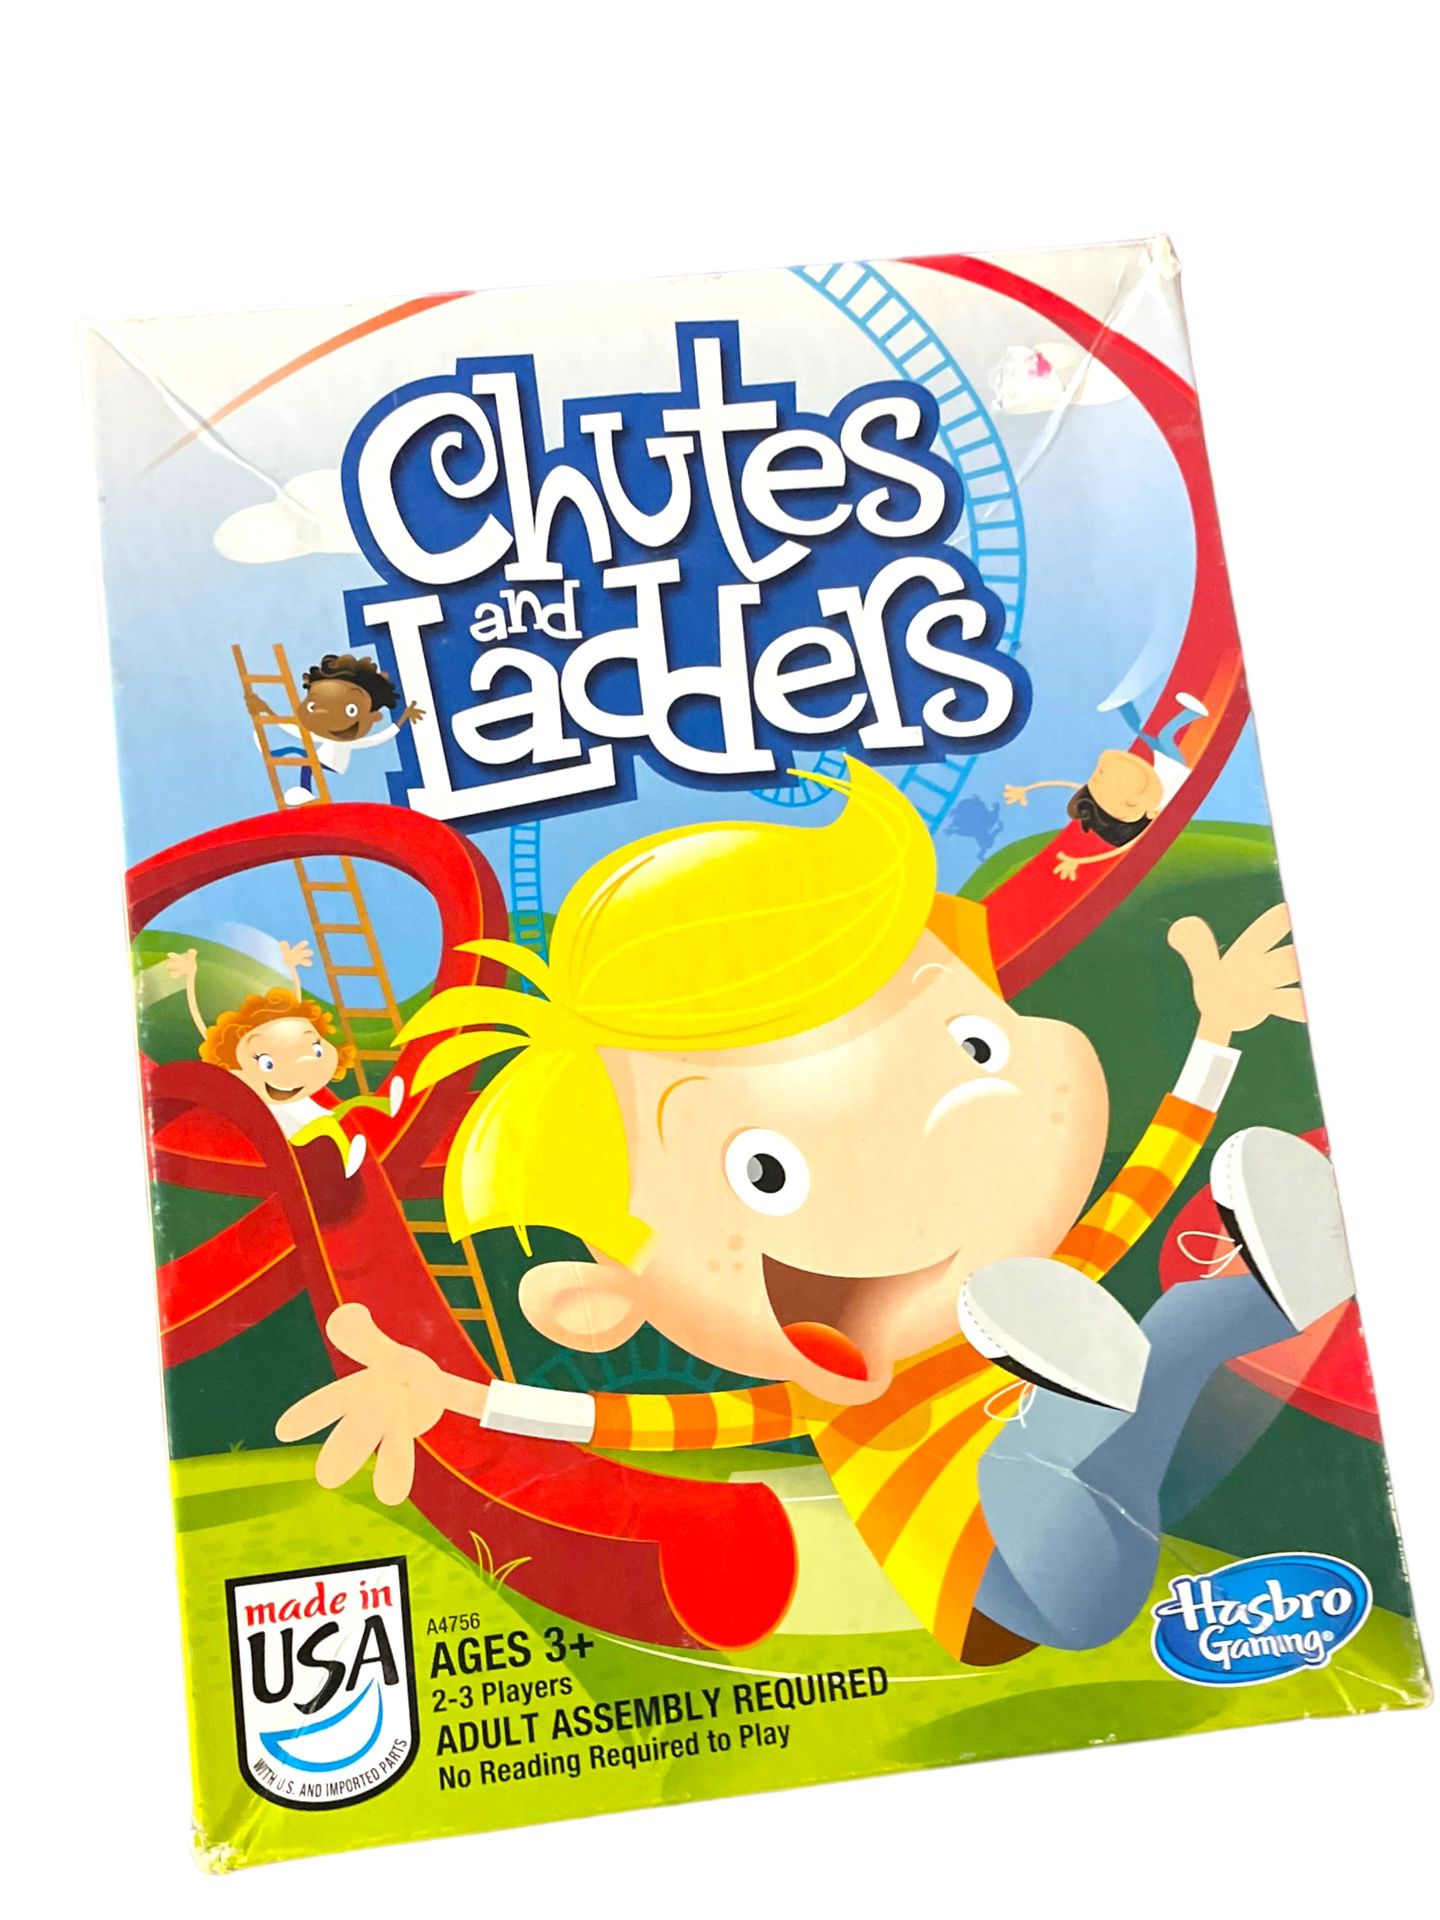 CHUTES AND LADDERS